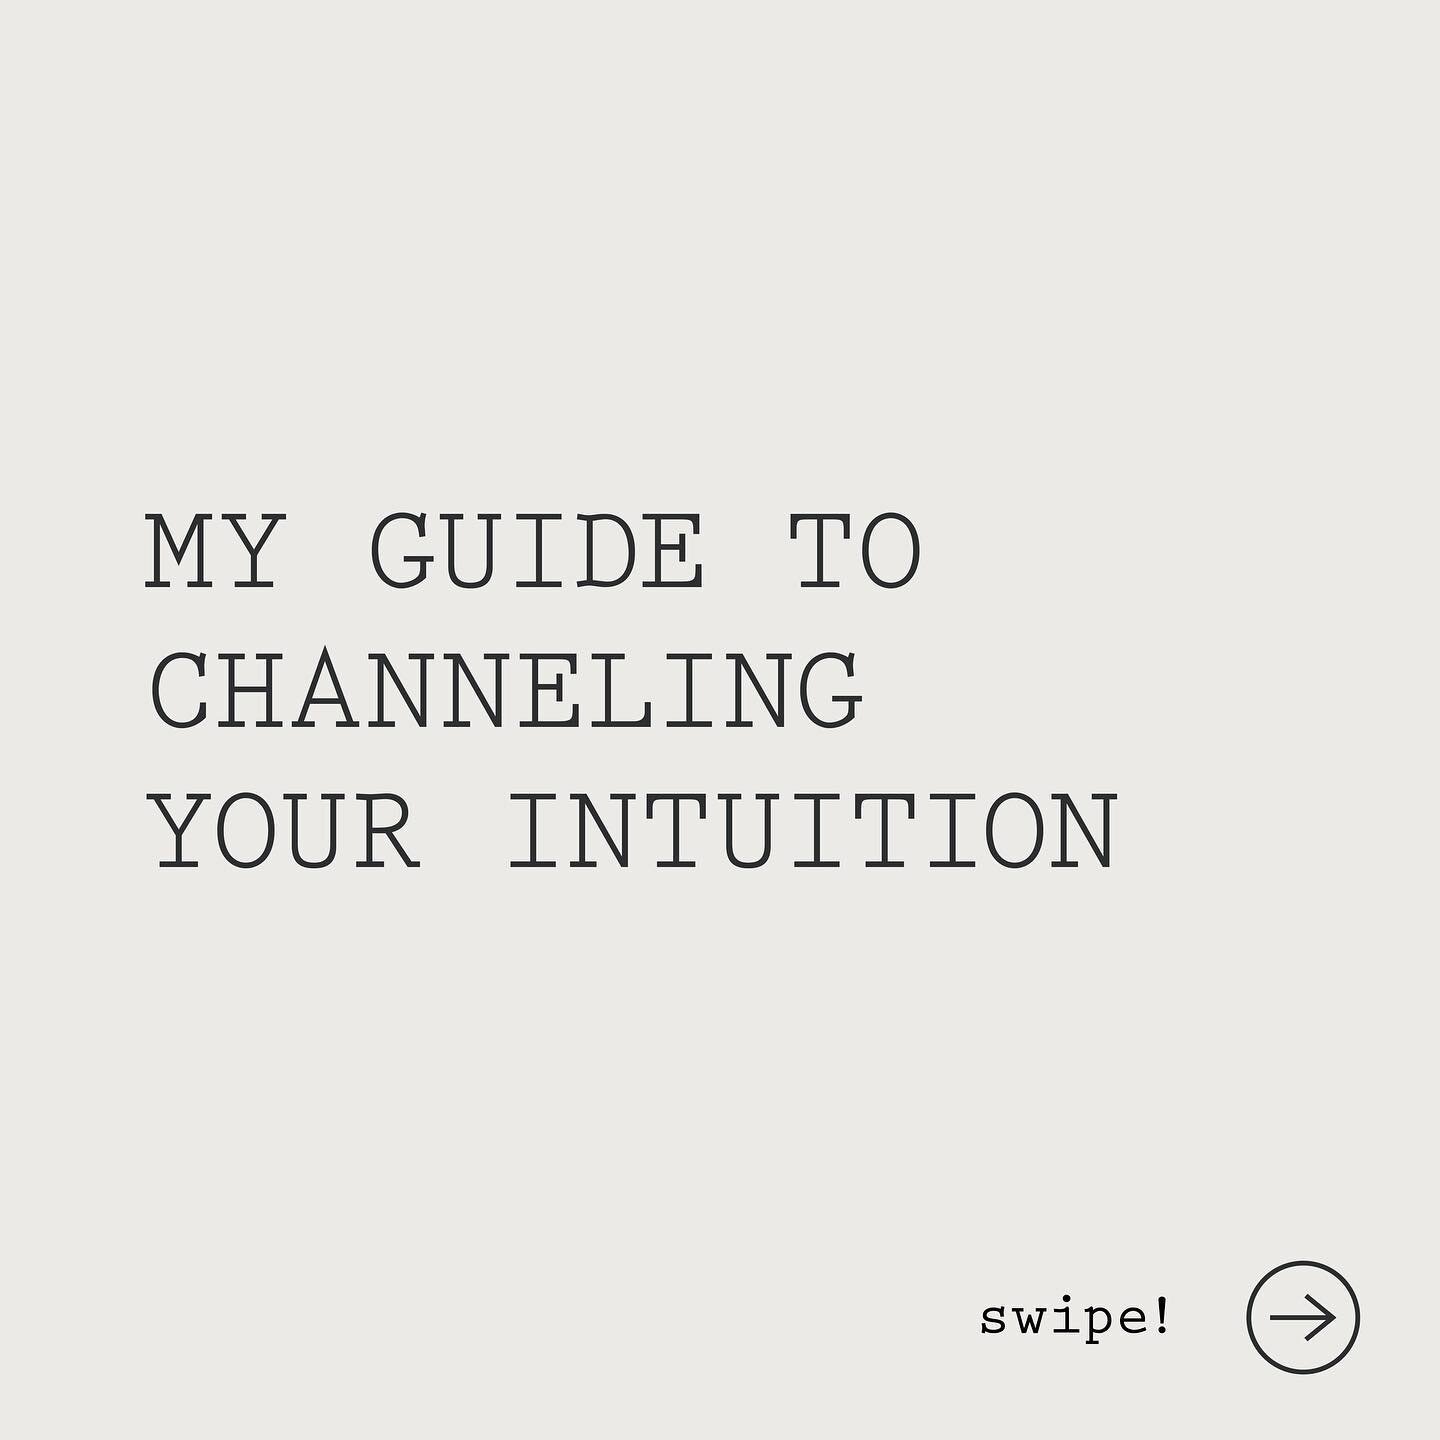 in case you missed this week&rsquo;s episode, here are some of the main ways I channel my own intuition (or have heard other people do so). 

let me know in the comments if you have anything you&rsquo;d add to the list ! ✨

#whatsstoppingyoupodcast